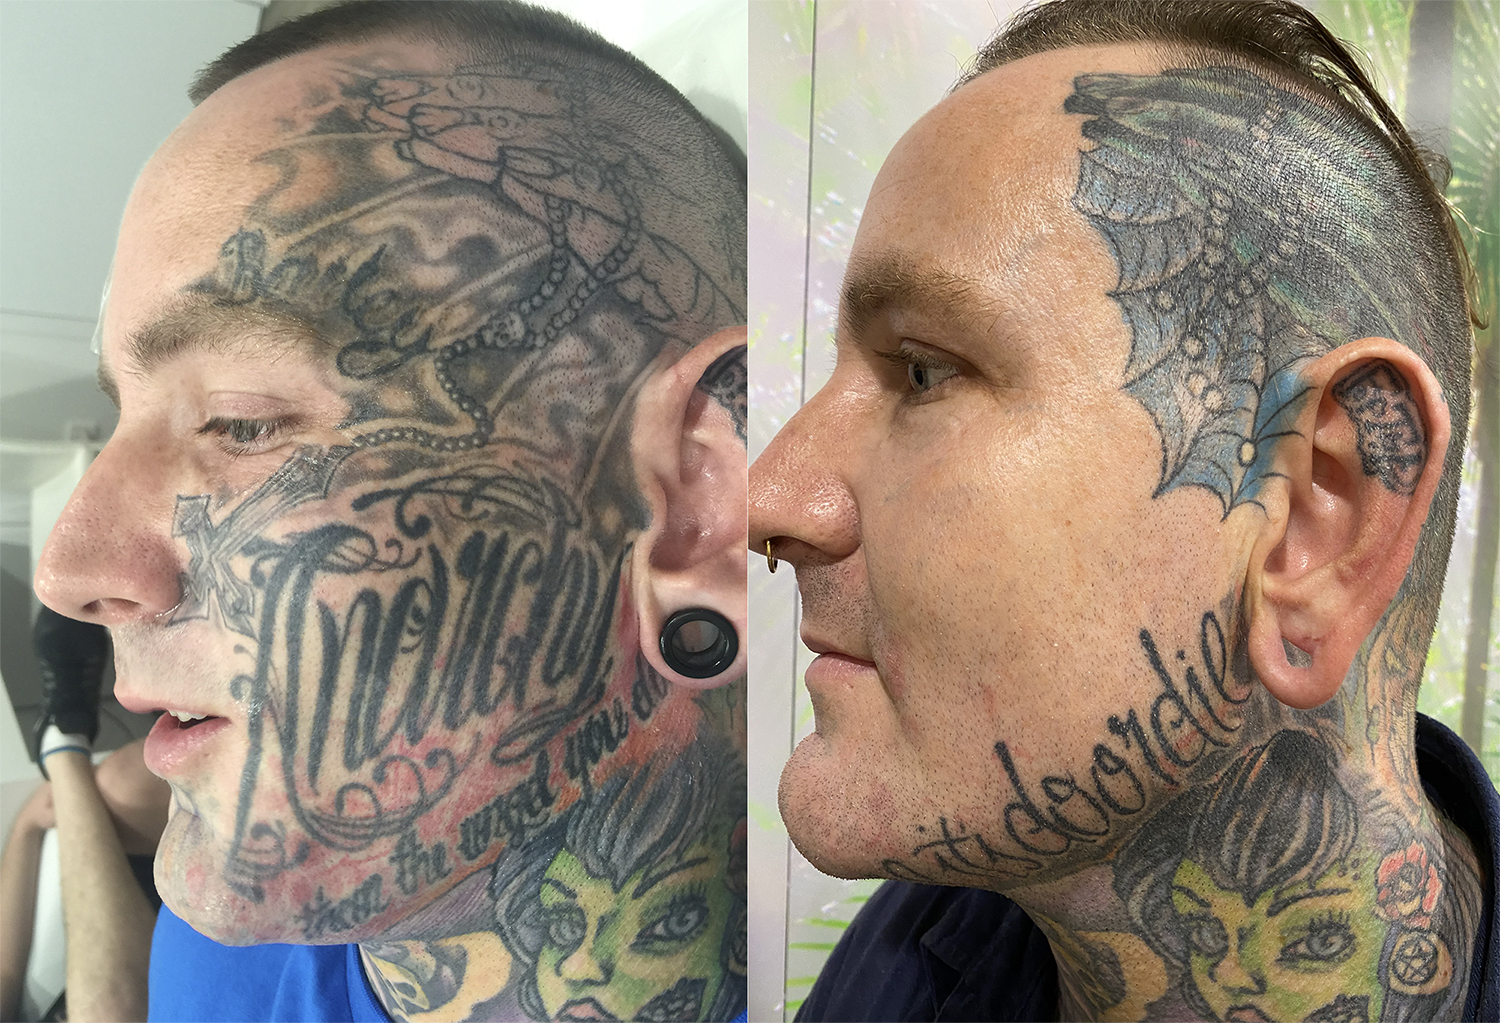 Brisbane club Hey Chica! bans 23yo Moale James with face tattoos from  entering - ABC Pacific